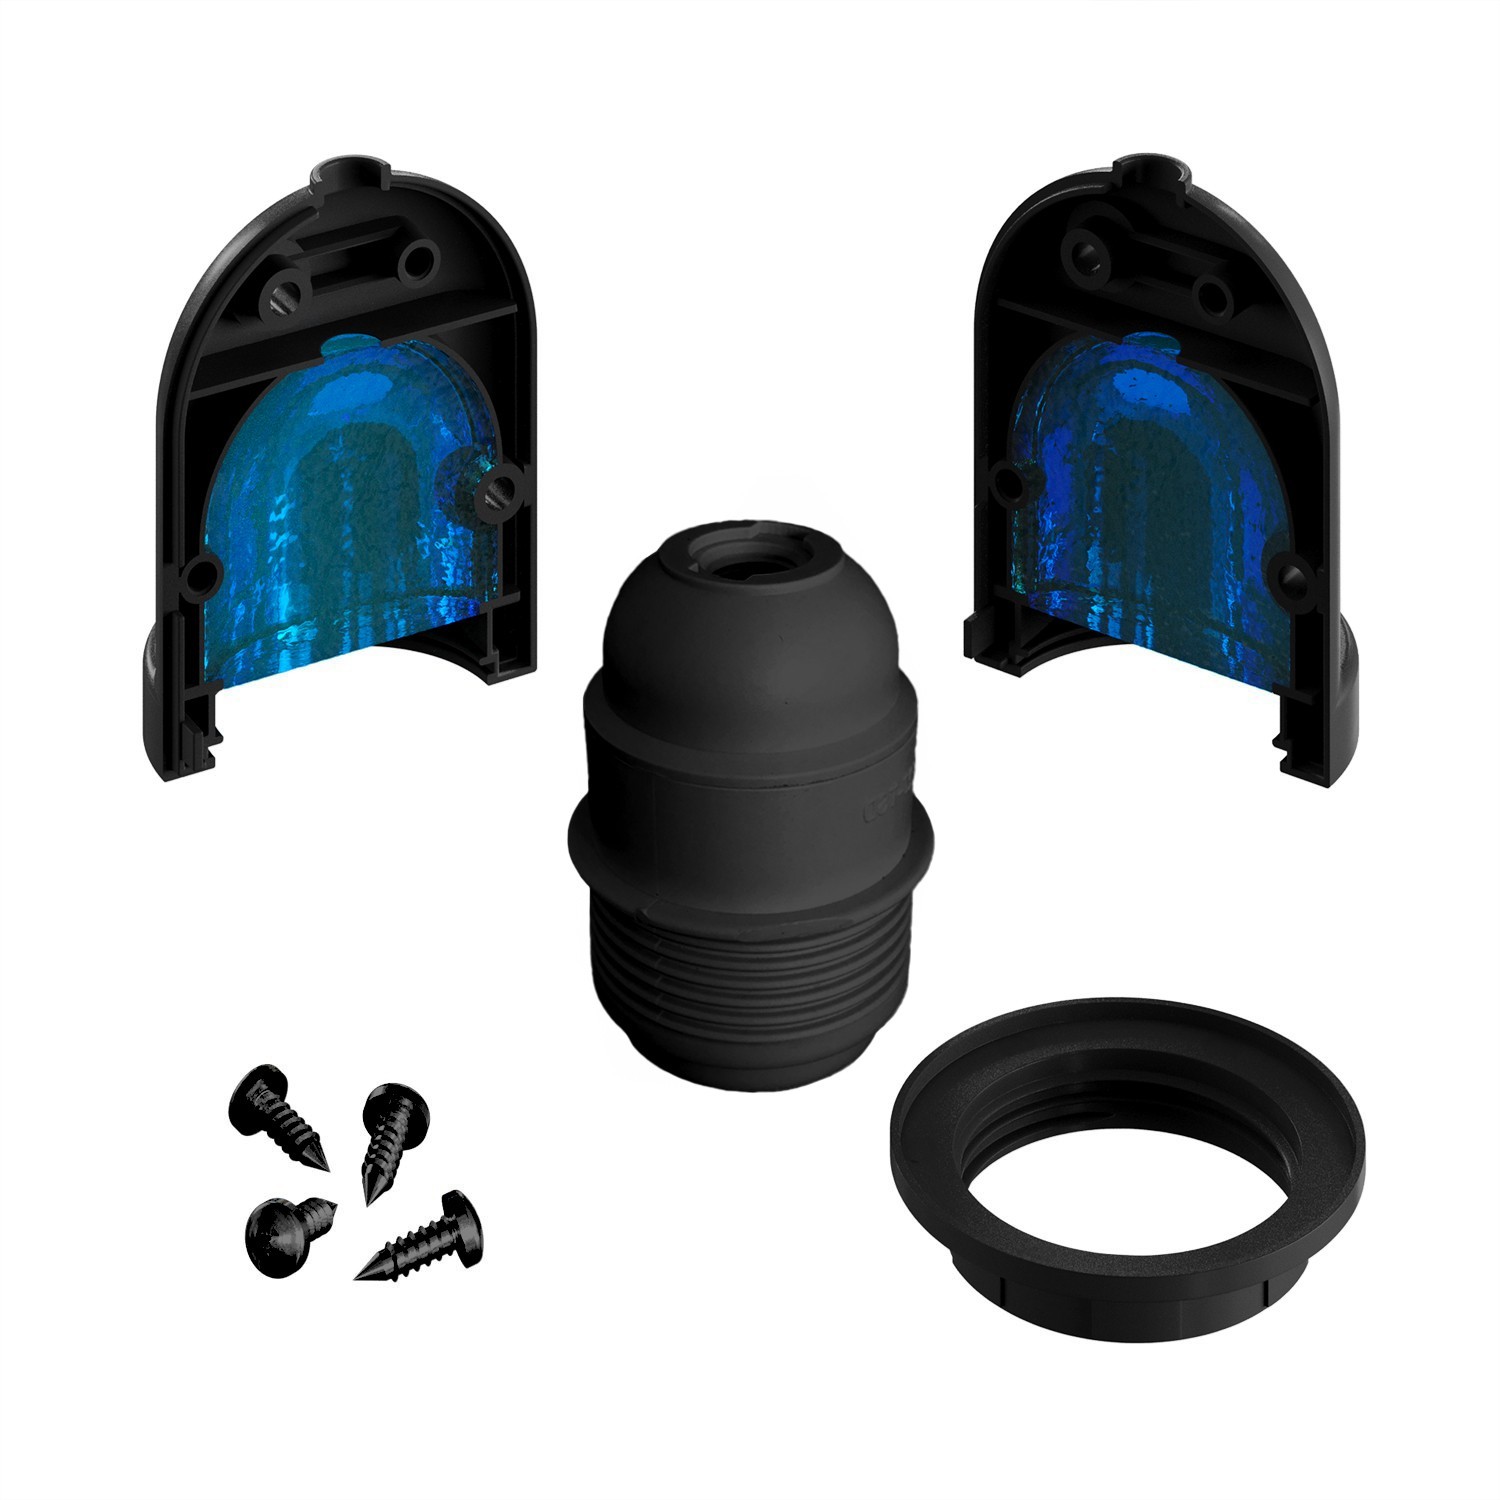 EIVA ELEGANT, E27 outdoor silicone lamp holder kit - the first IP65 re-wirable lamp holder worldwide